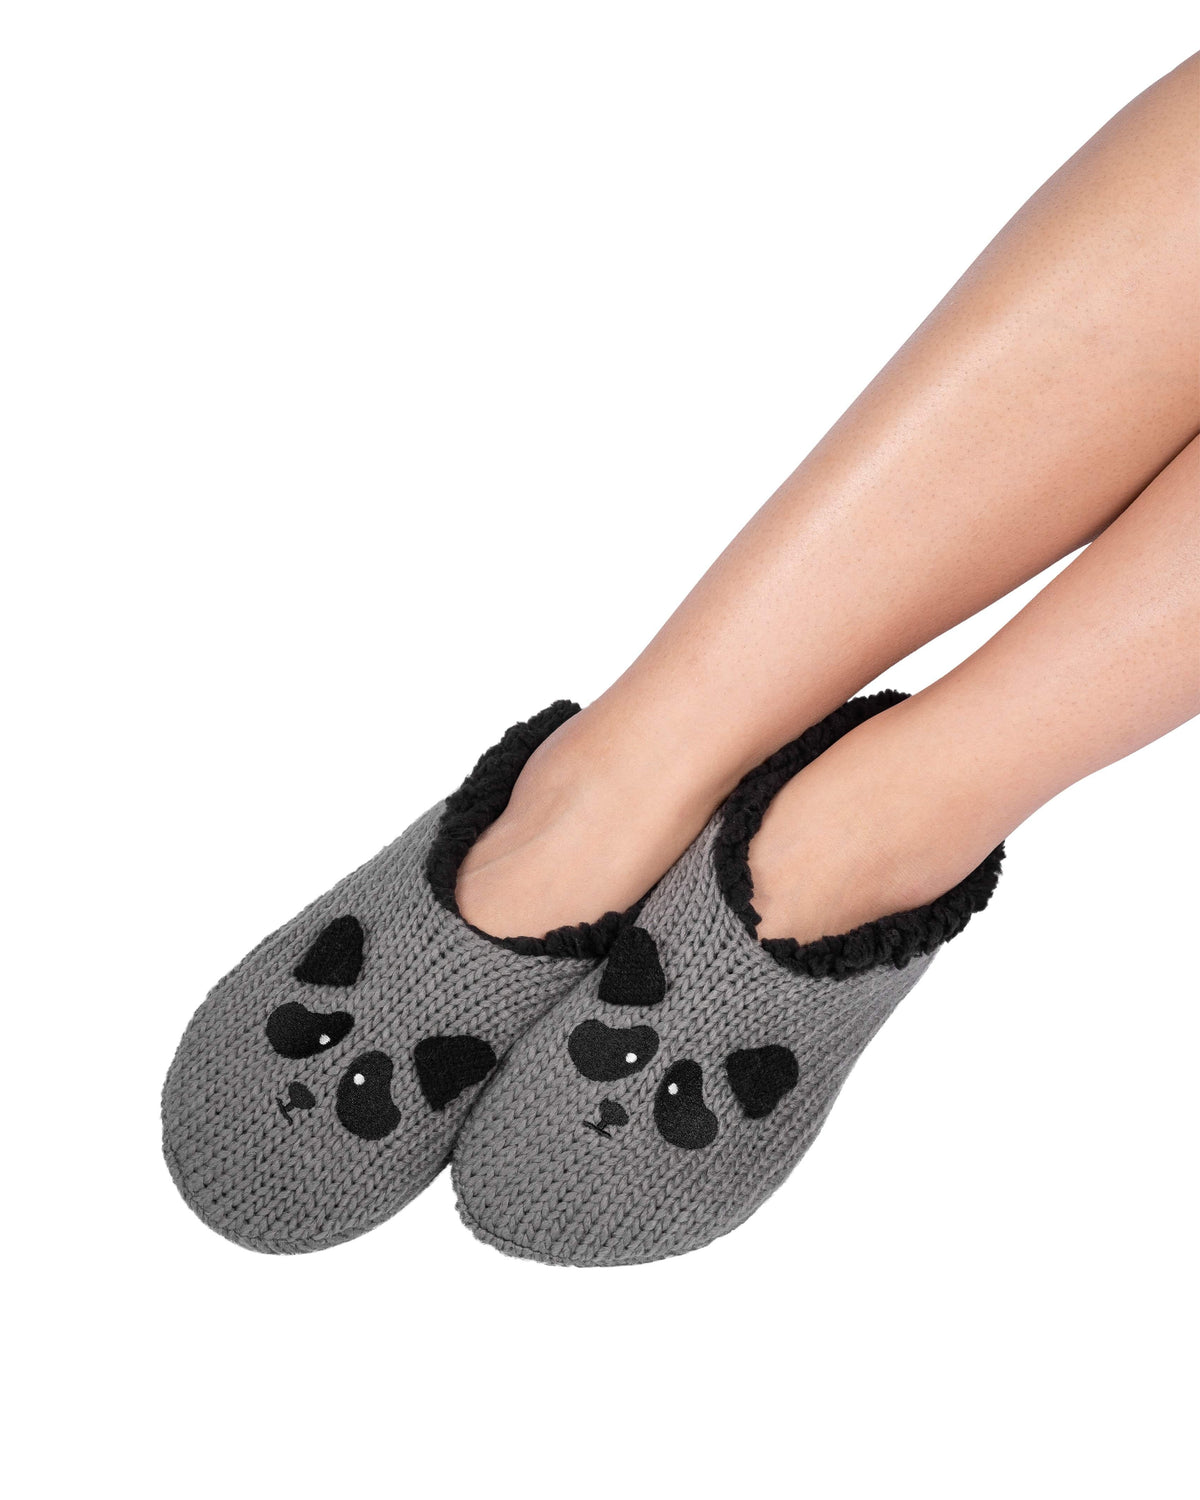 Critter Ankle Slippers - Raccoon (Smoked Pearl) - LATTELOVE Co.